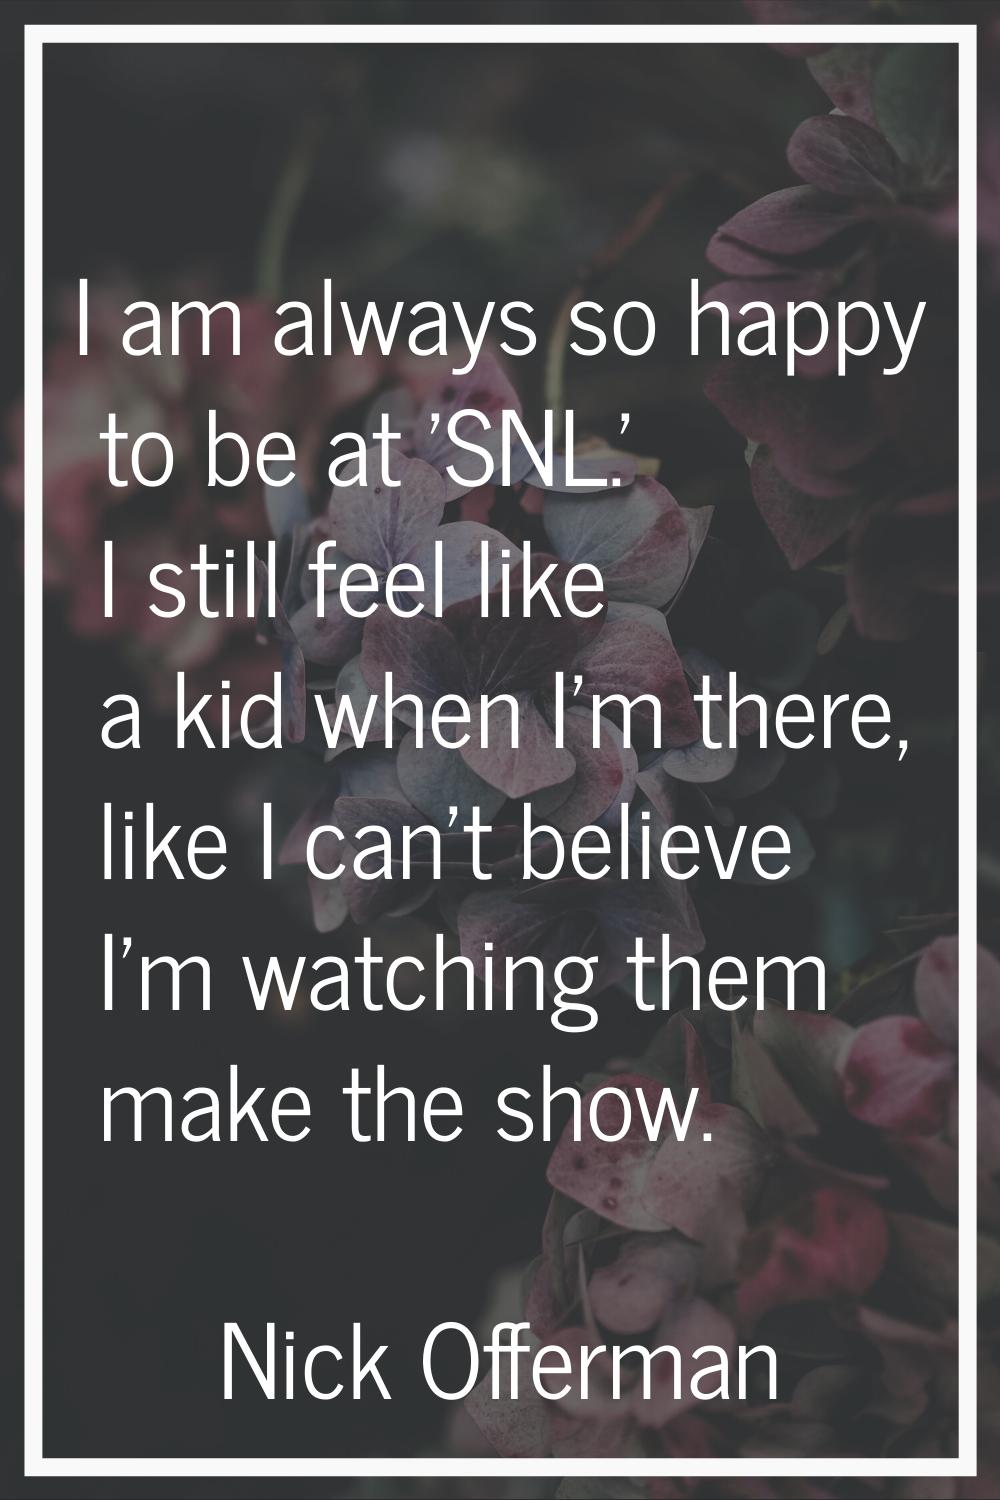 I am always so happy to be at 'SNL.' I still feel like a kid when I'm there, like I can't believe I